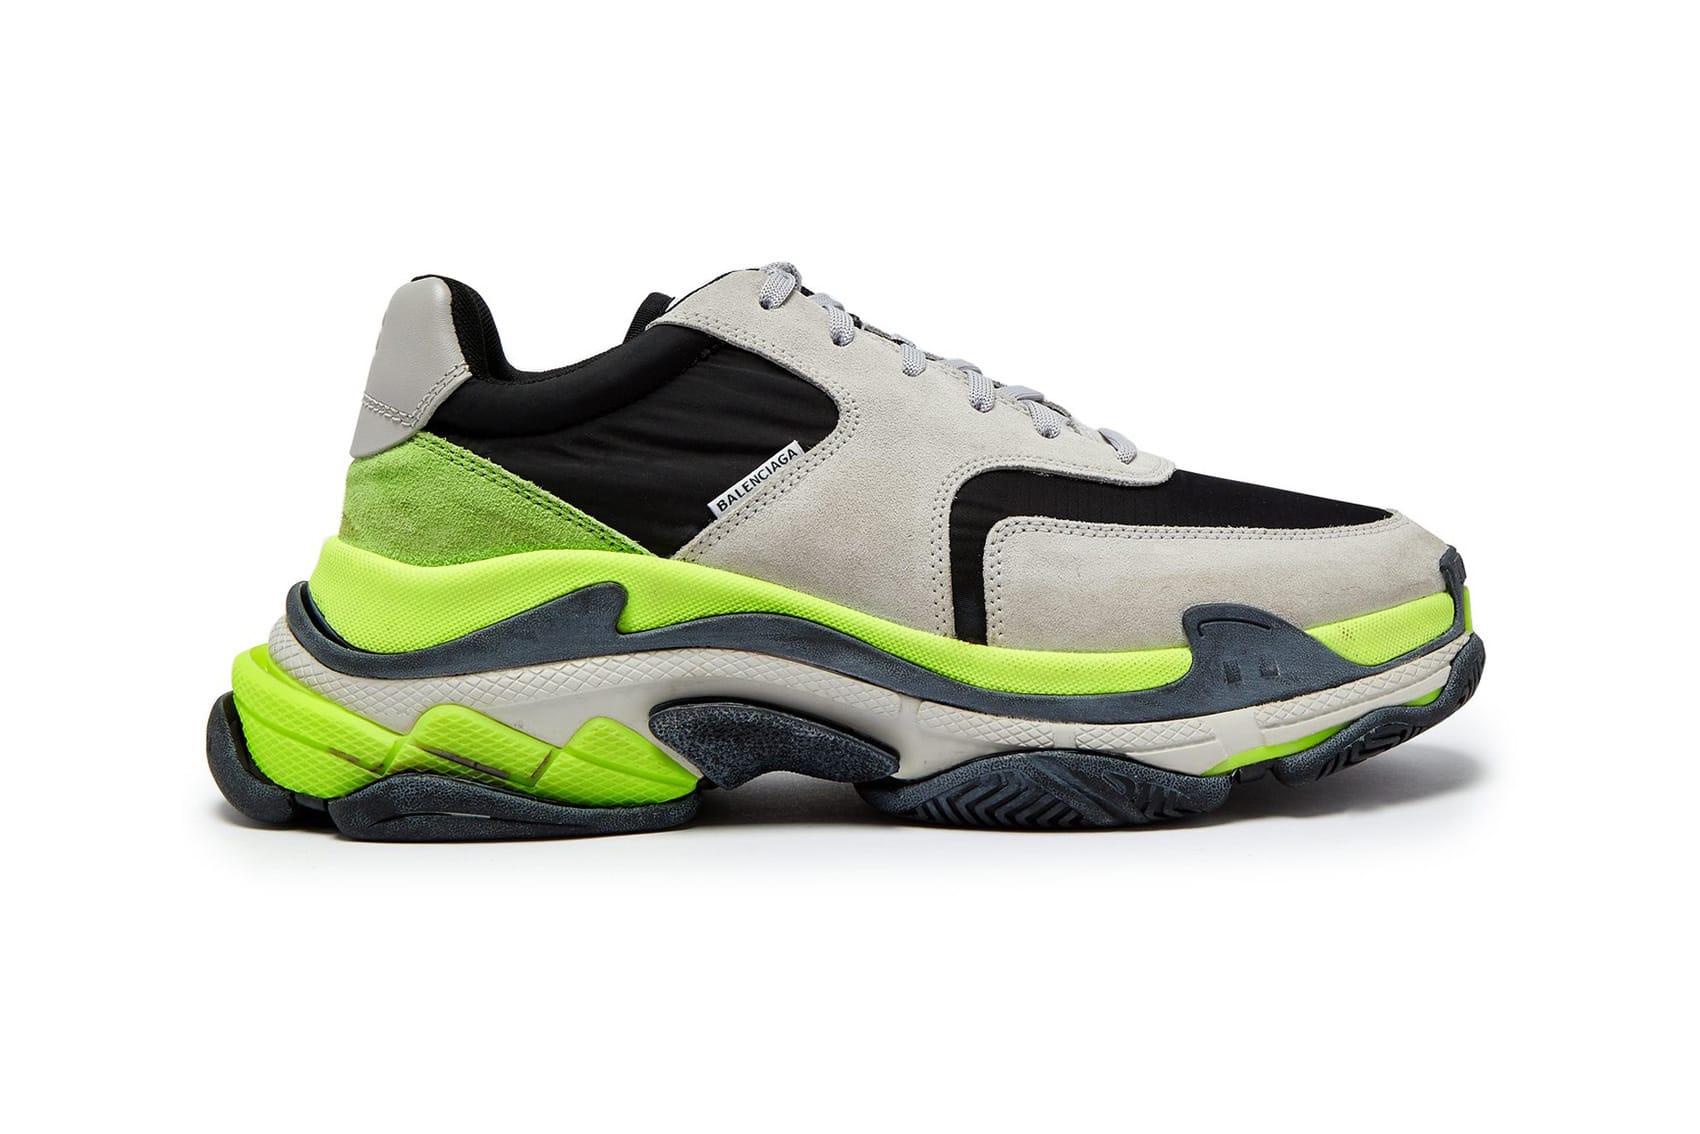 FiND Possible Balenciaga Triple S rep with new font